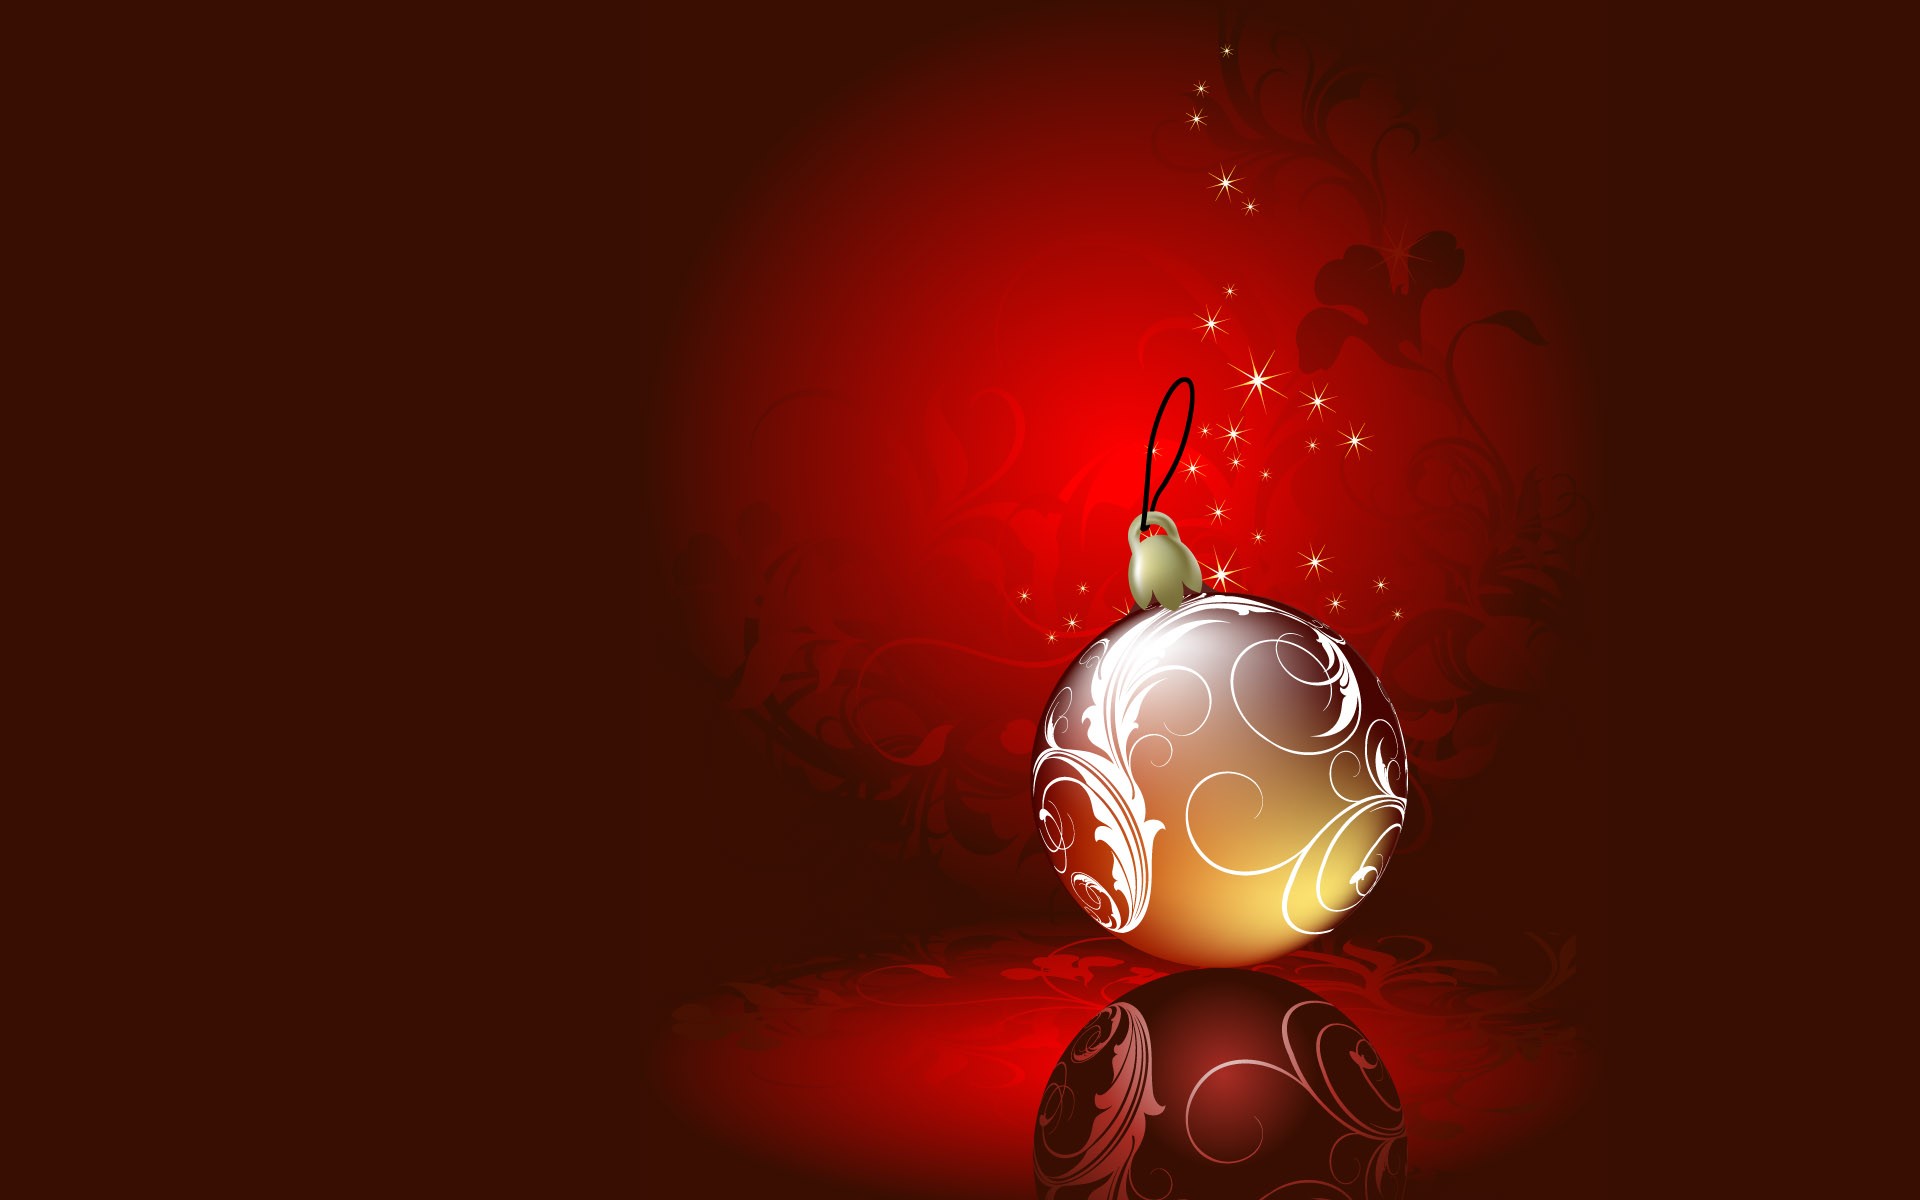 Exquisite Christmas Theme HD Wallpapers #28 - 1920x1200